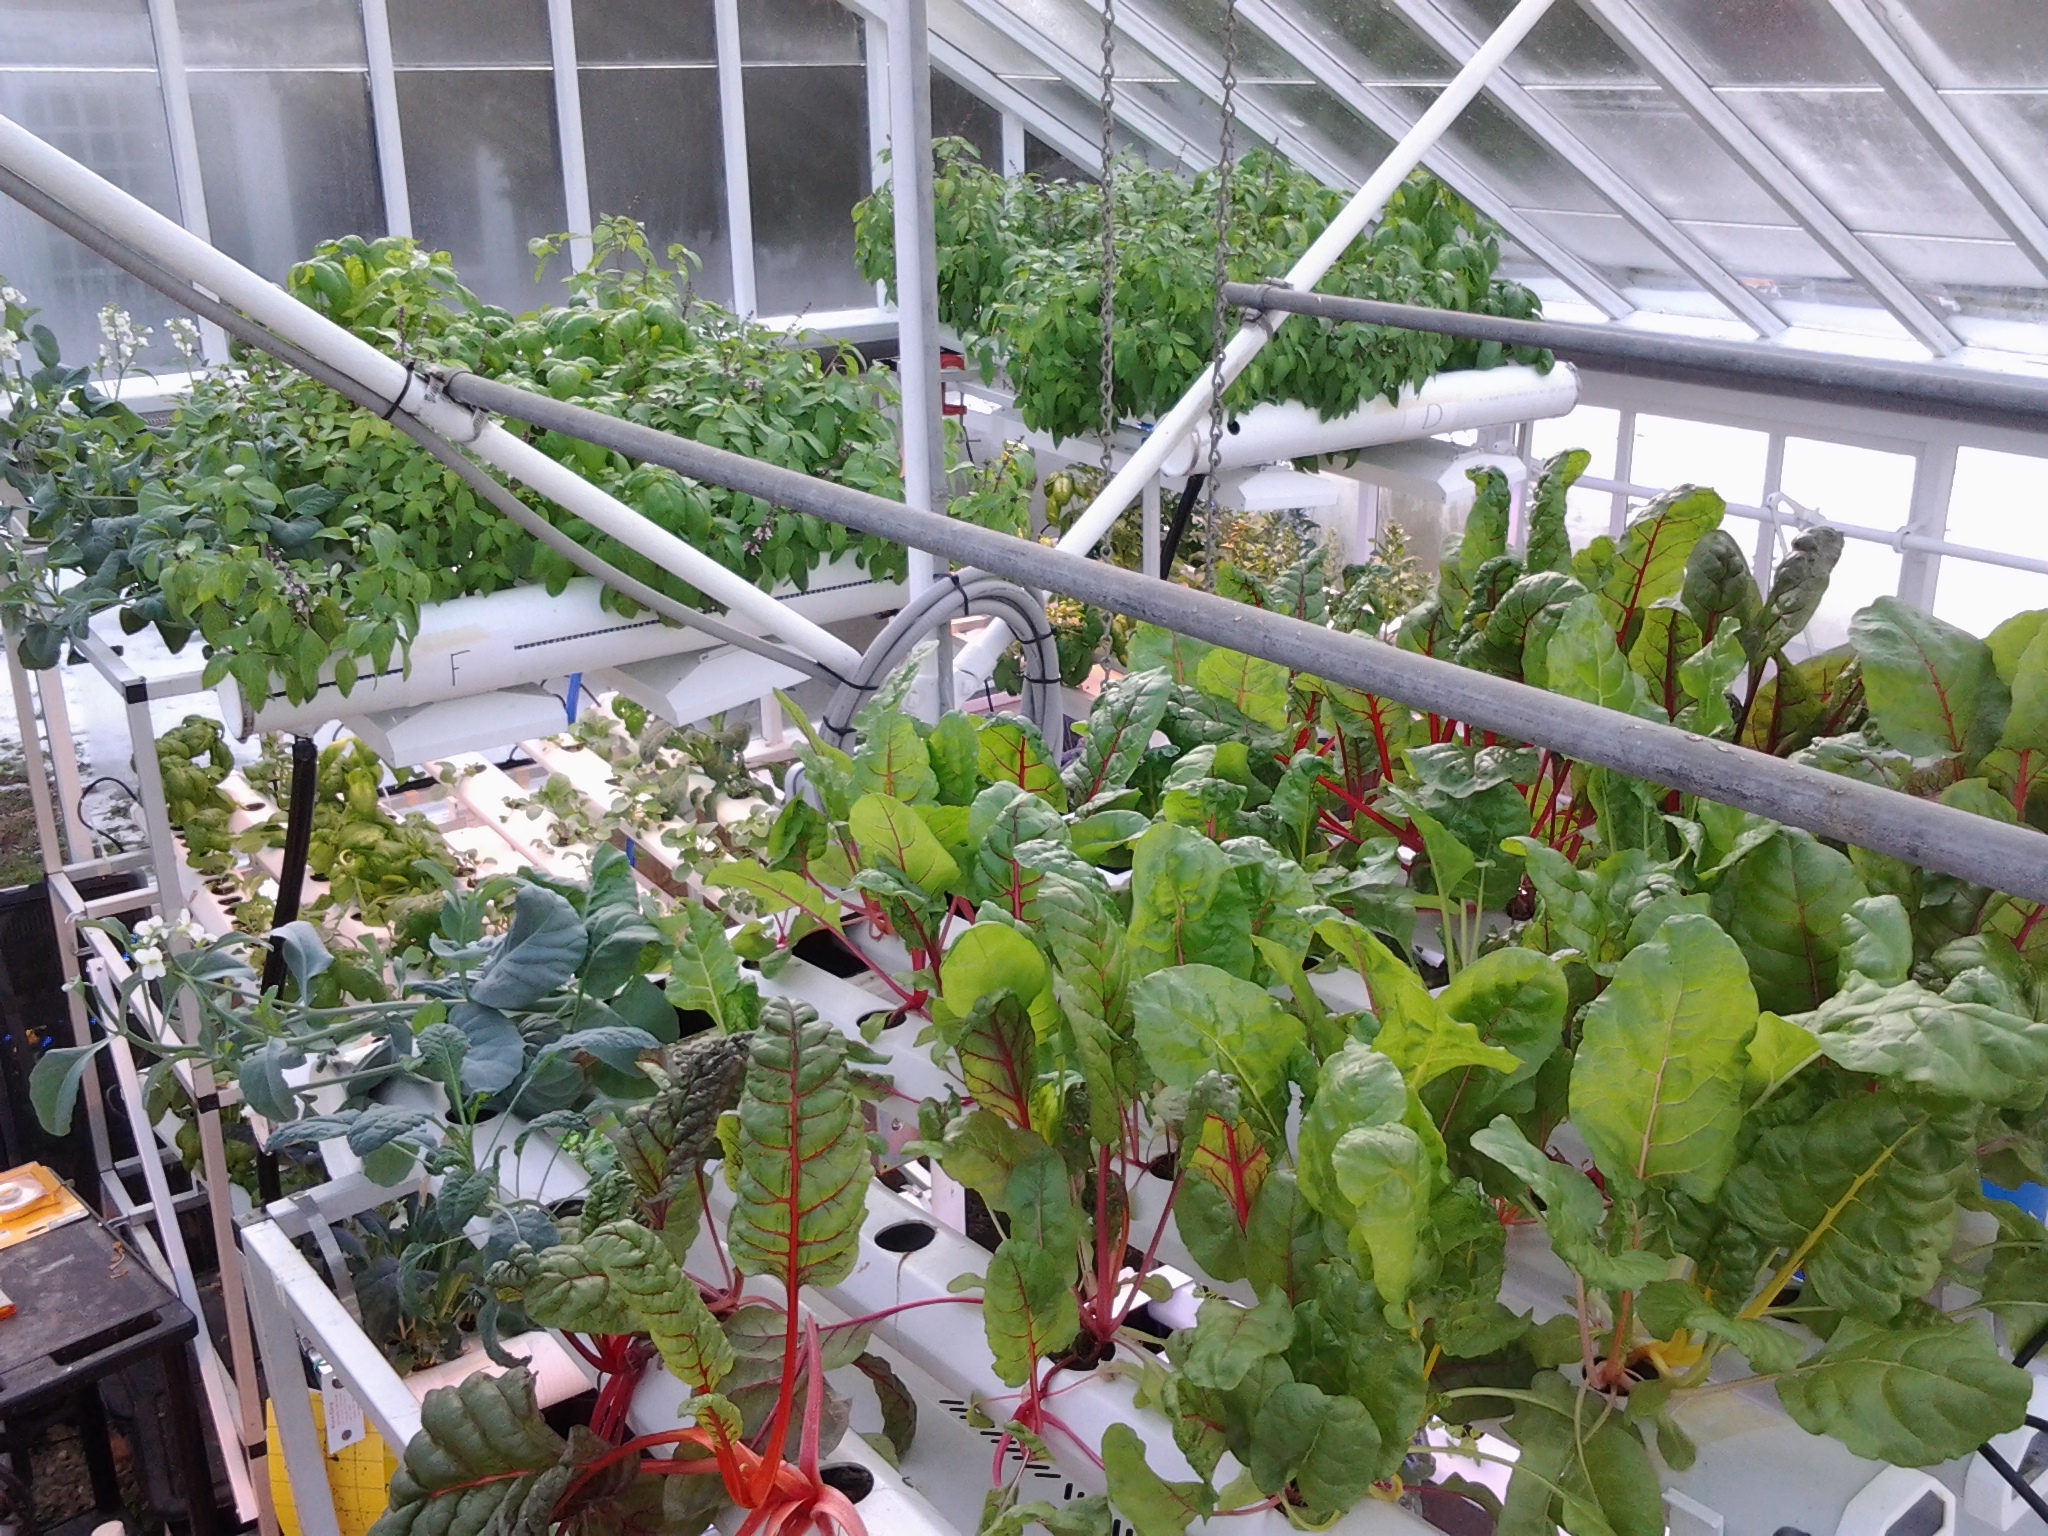 A hydroponic system used to grow leafy greens and herbs in the Boston College greenhouse.